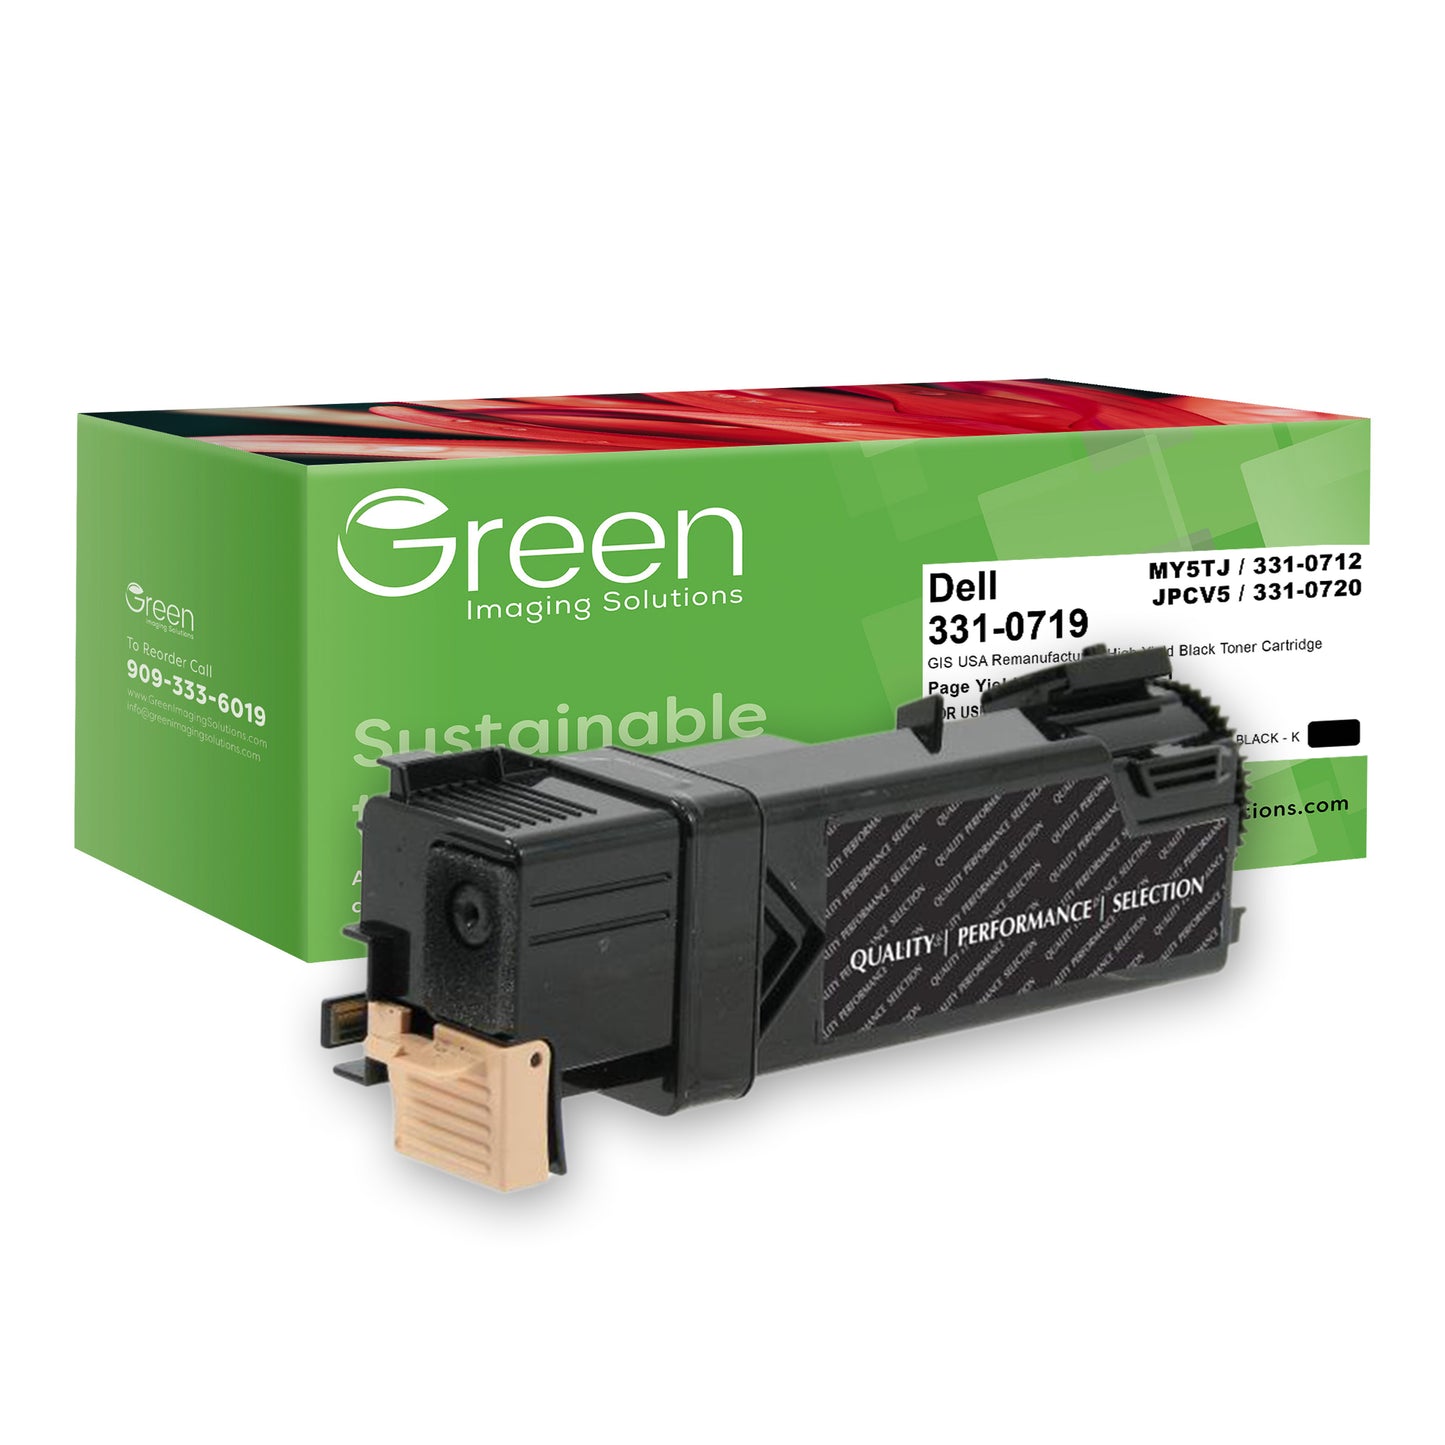 Green Imaging Solutions USA Remanufactured High Yield Black Toner Cartridge for Dell 2150/2155